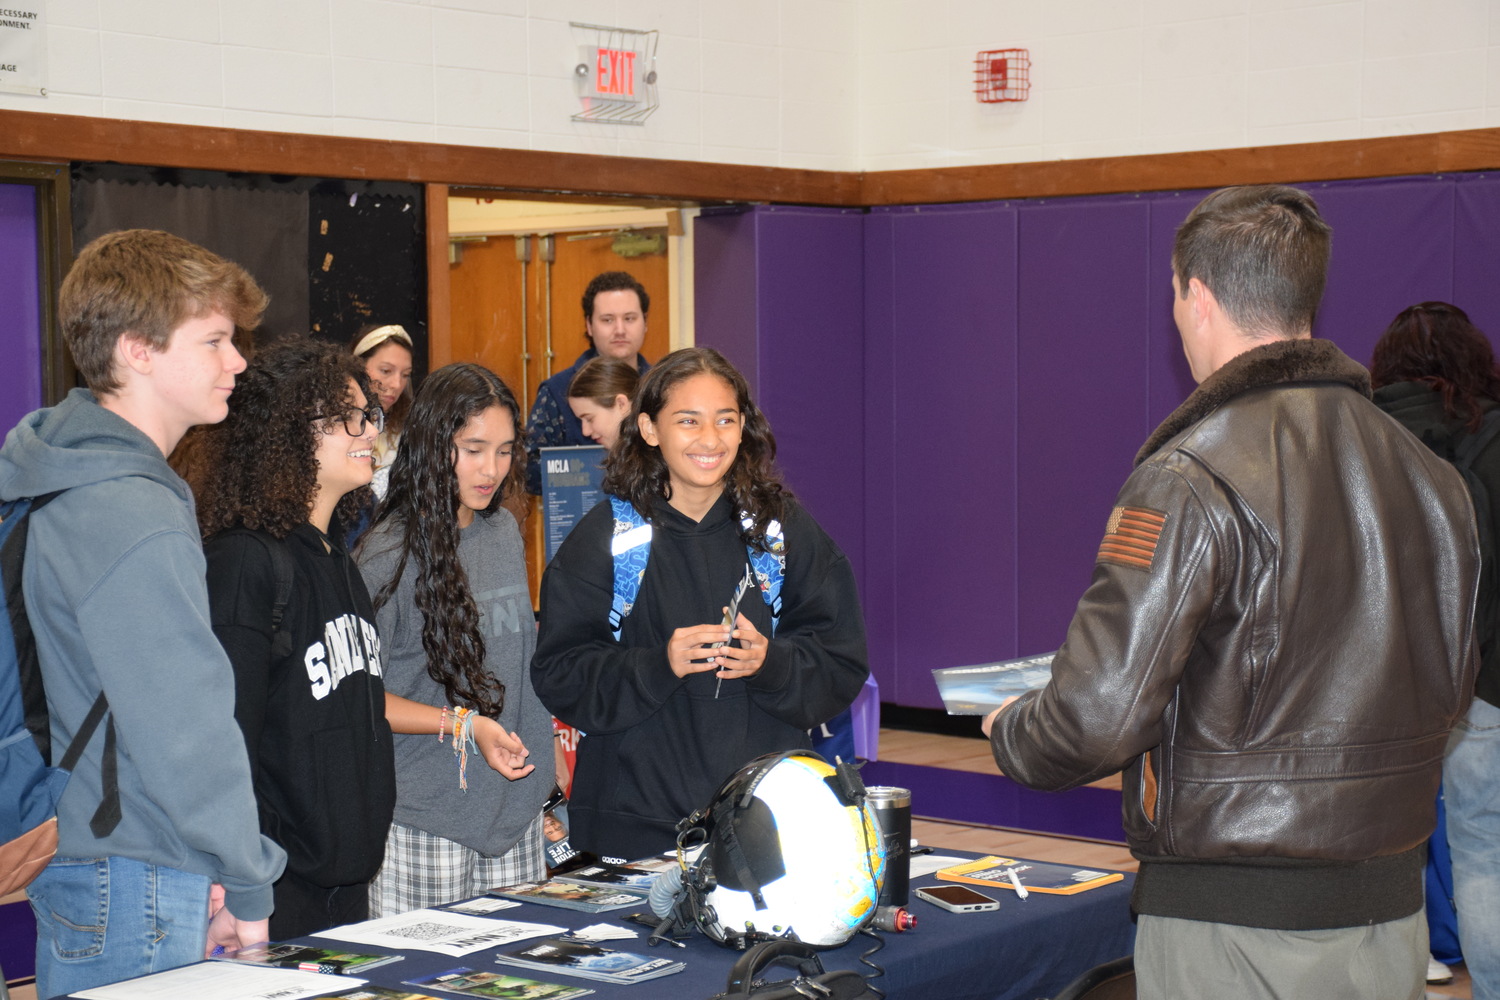 Hampton Bays High School students explored a wide variety of college and career options during their school’s annual Fall College Fair on September 28. During the event, students learned more about state and private colleges from school representatives. COURTESY HAMPTON BAYS SCHOOL DISTRICT